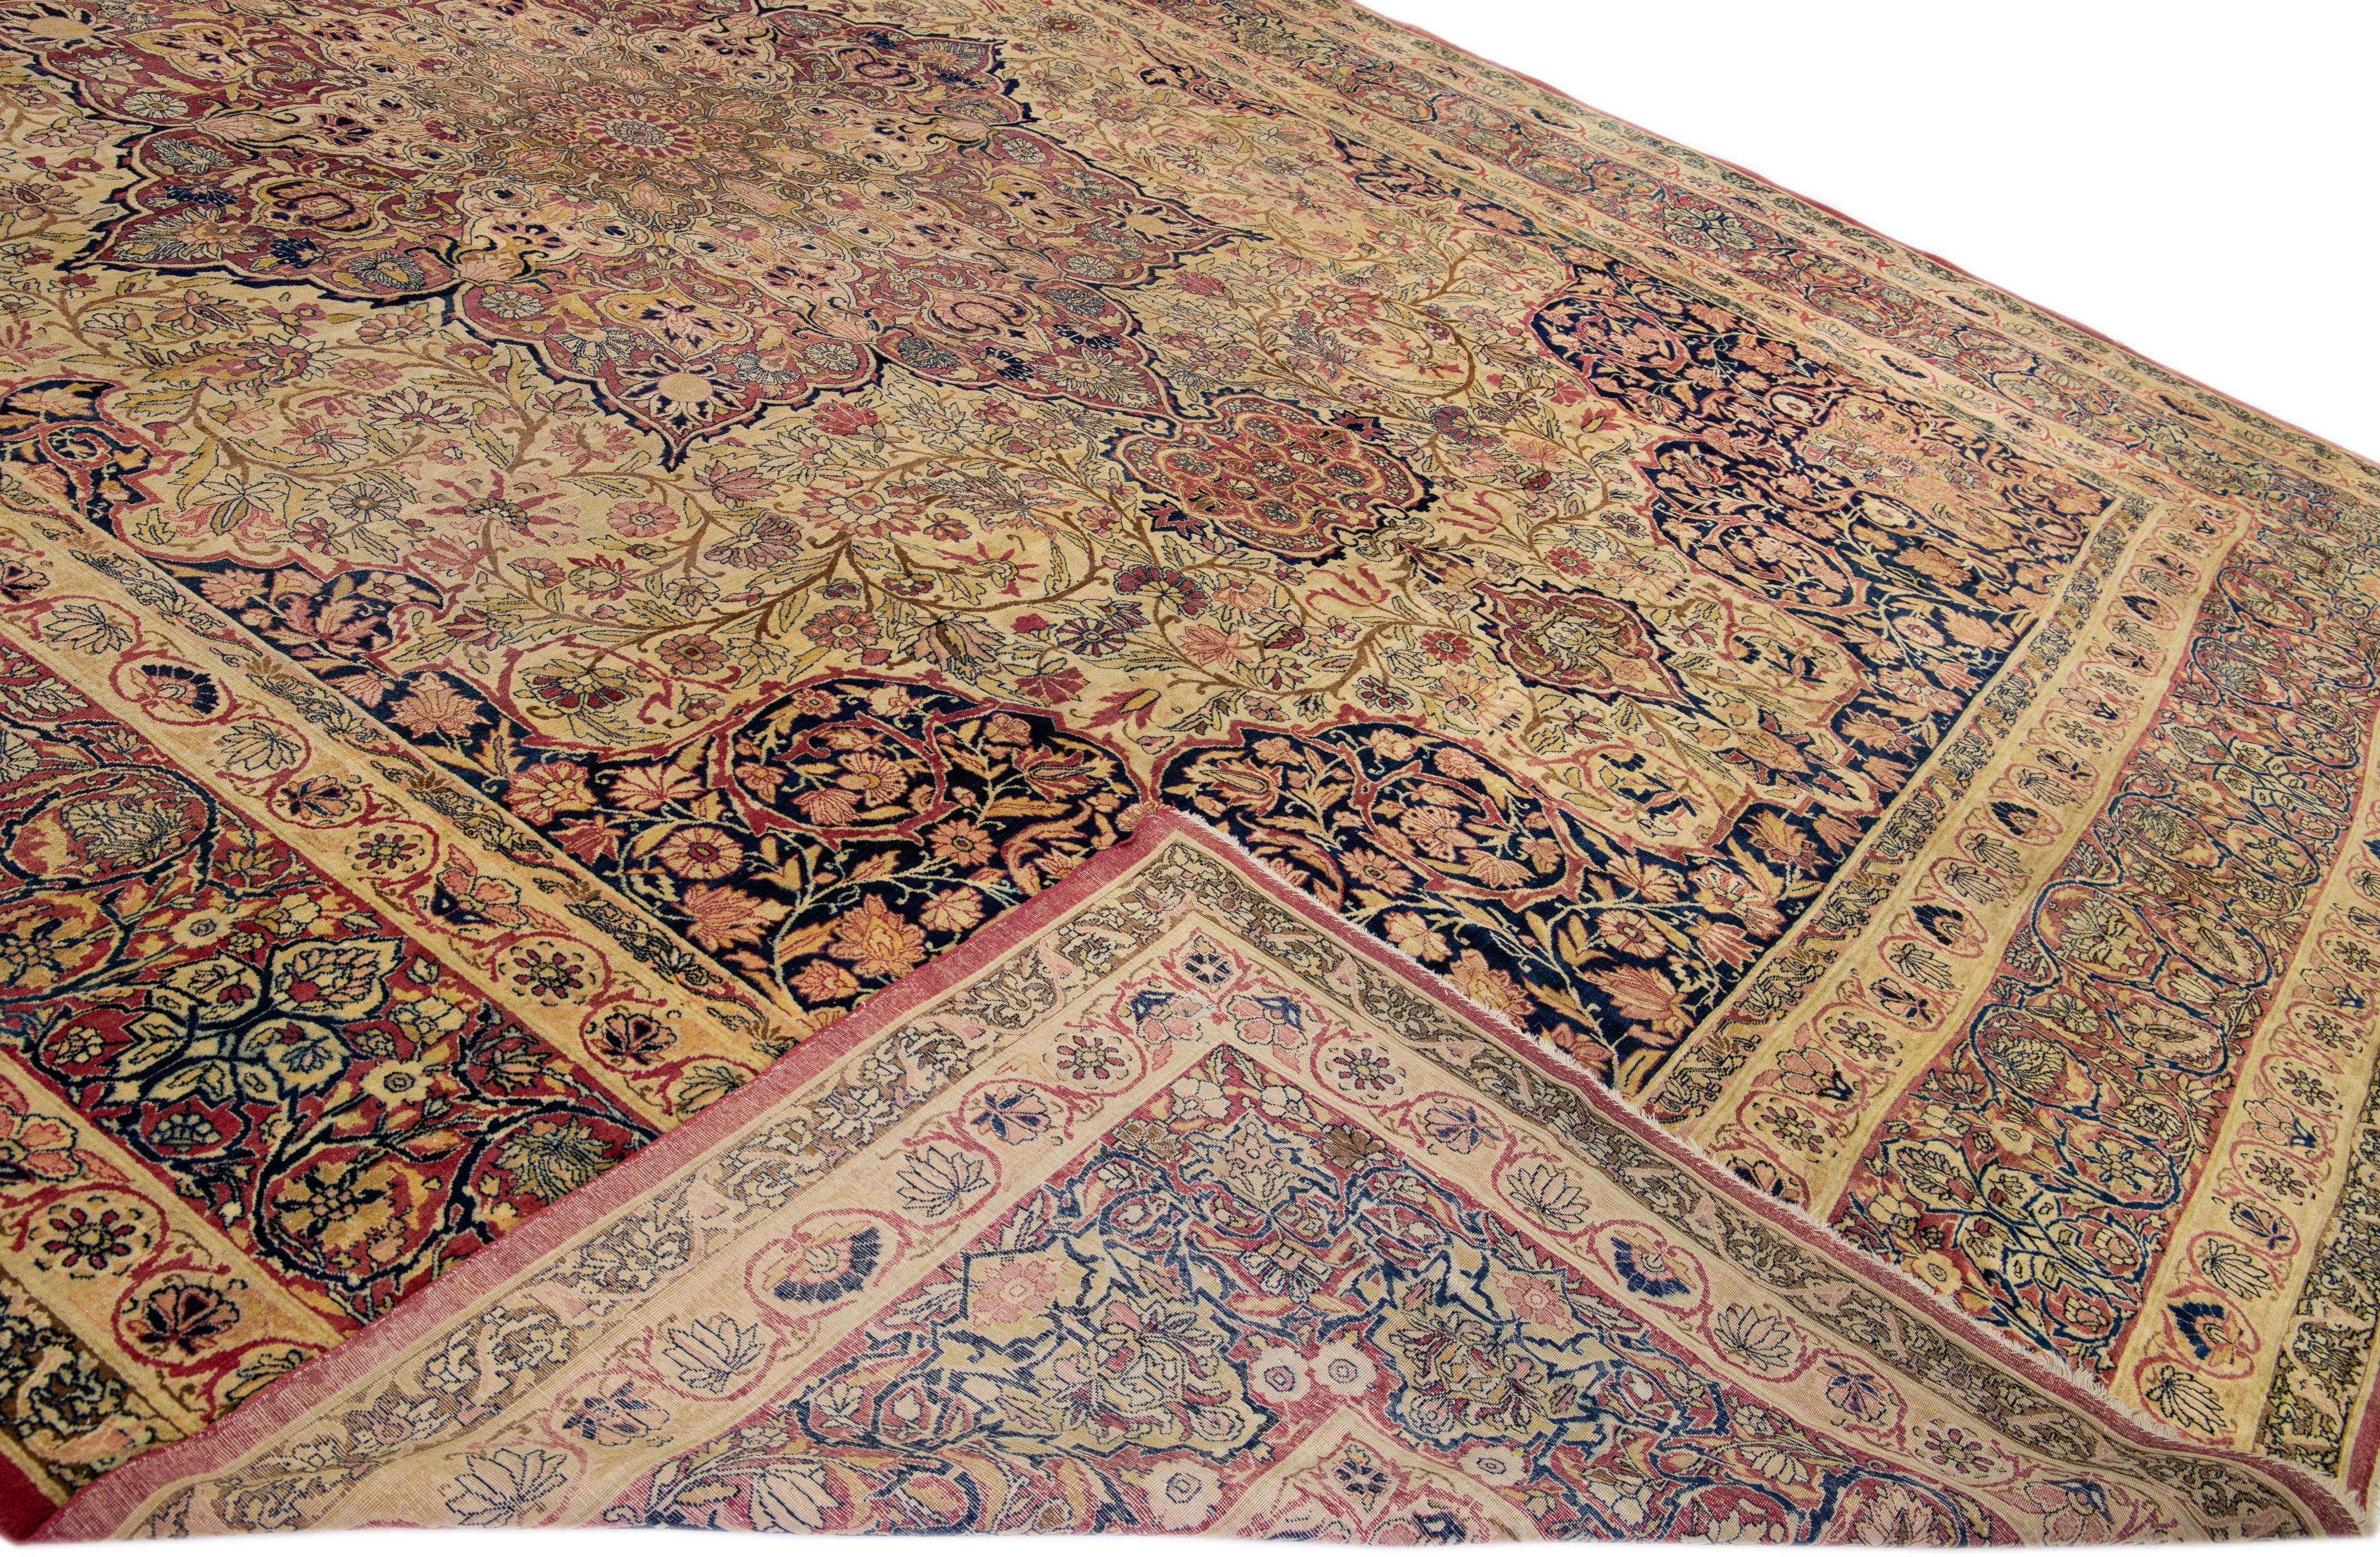 Beautiful antique Kerman hand-knotted wool rug with a beige and red field. This Persian rug has multicolor accents in a gorgeous all-over rosette pattern design.

This rug measures: 14' x 19'9